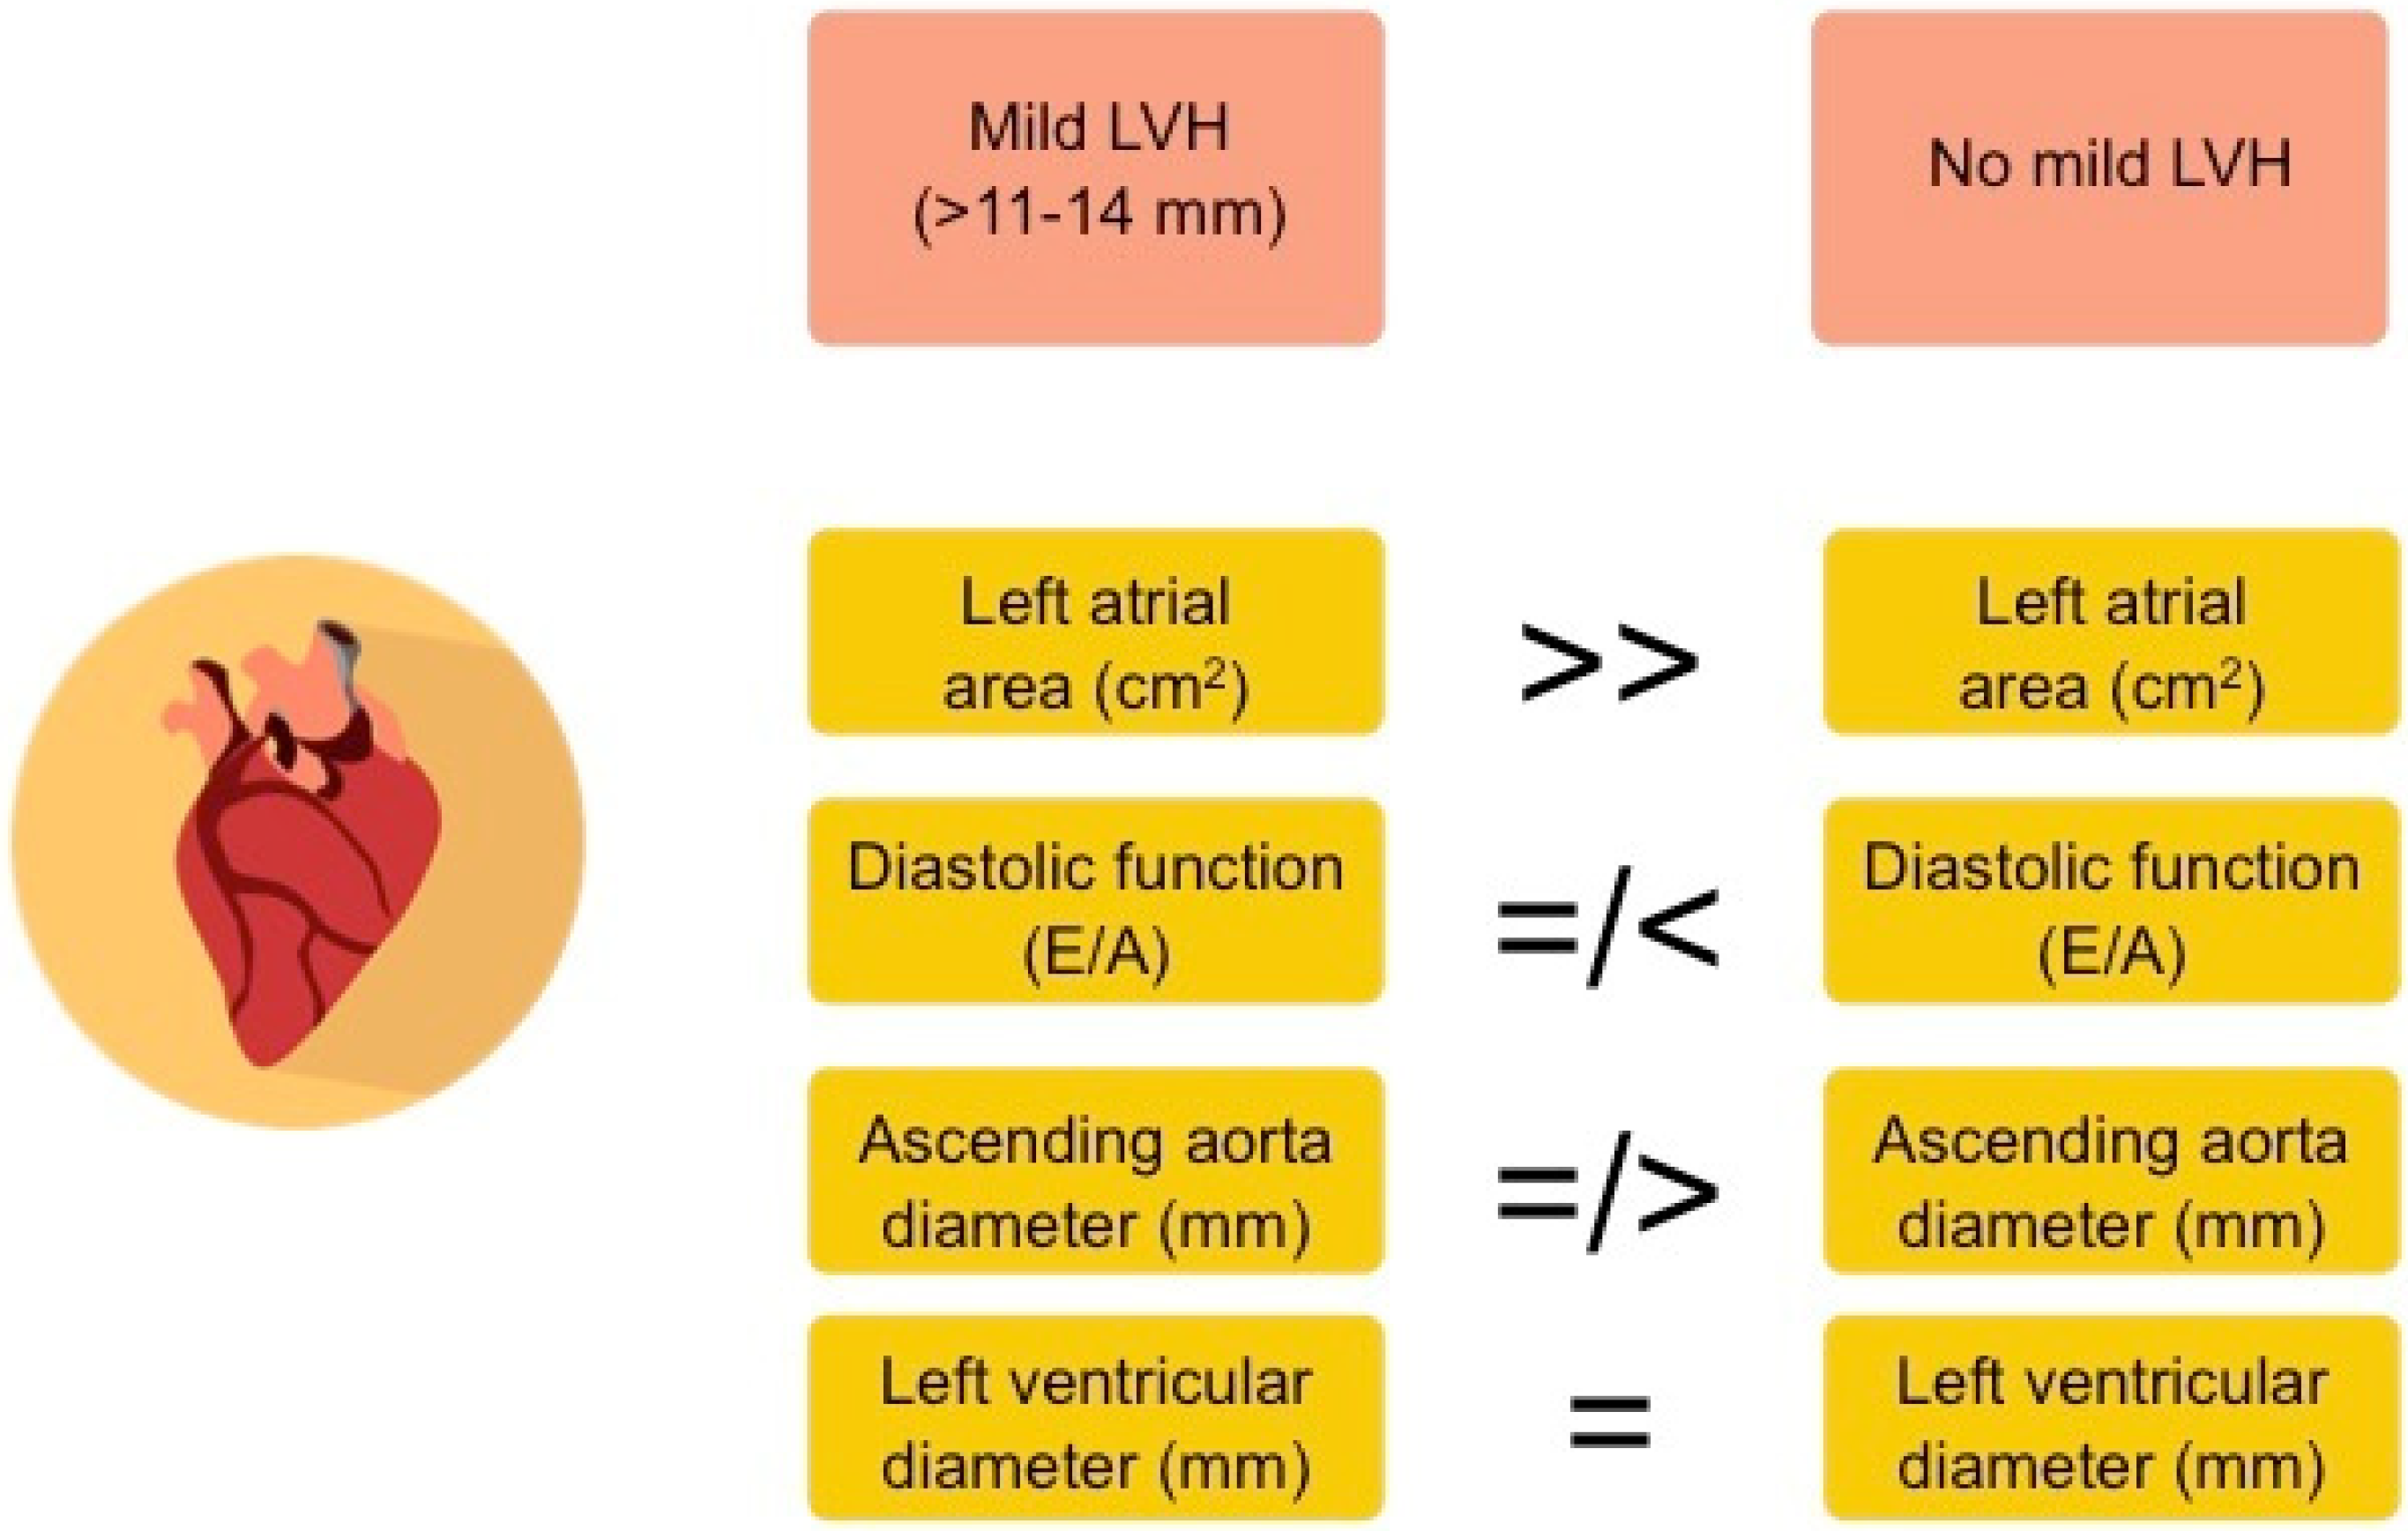 Left Ventricular Hypertrophy (LVH): Causes, Symptoms and Treatment